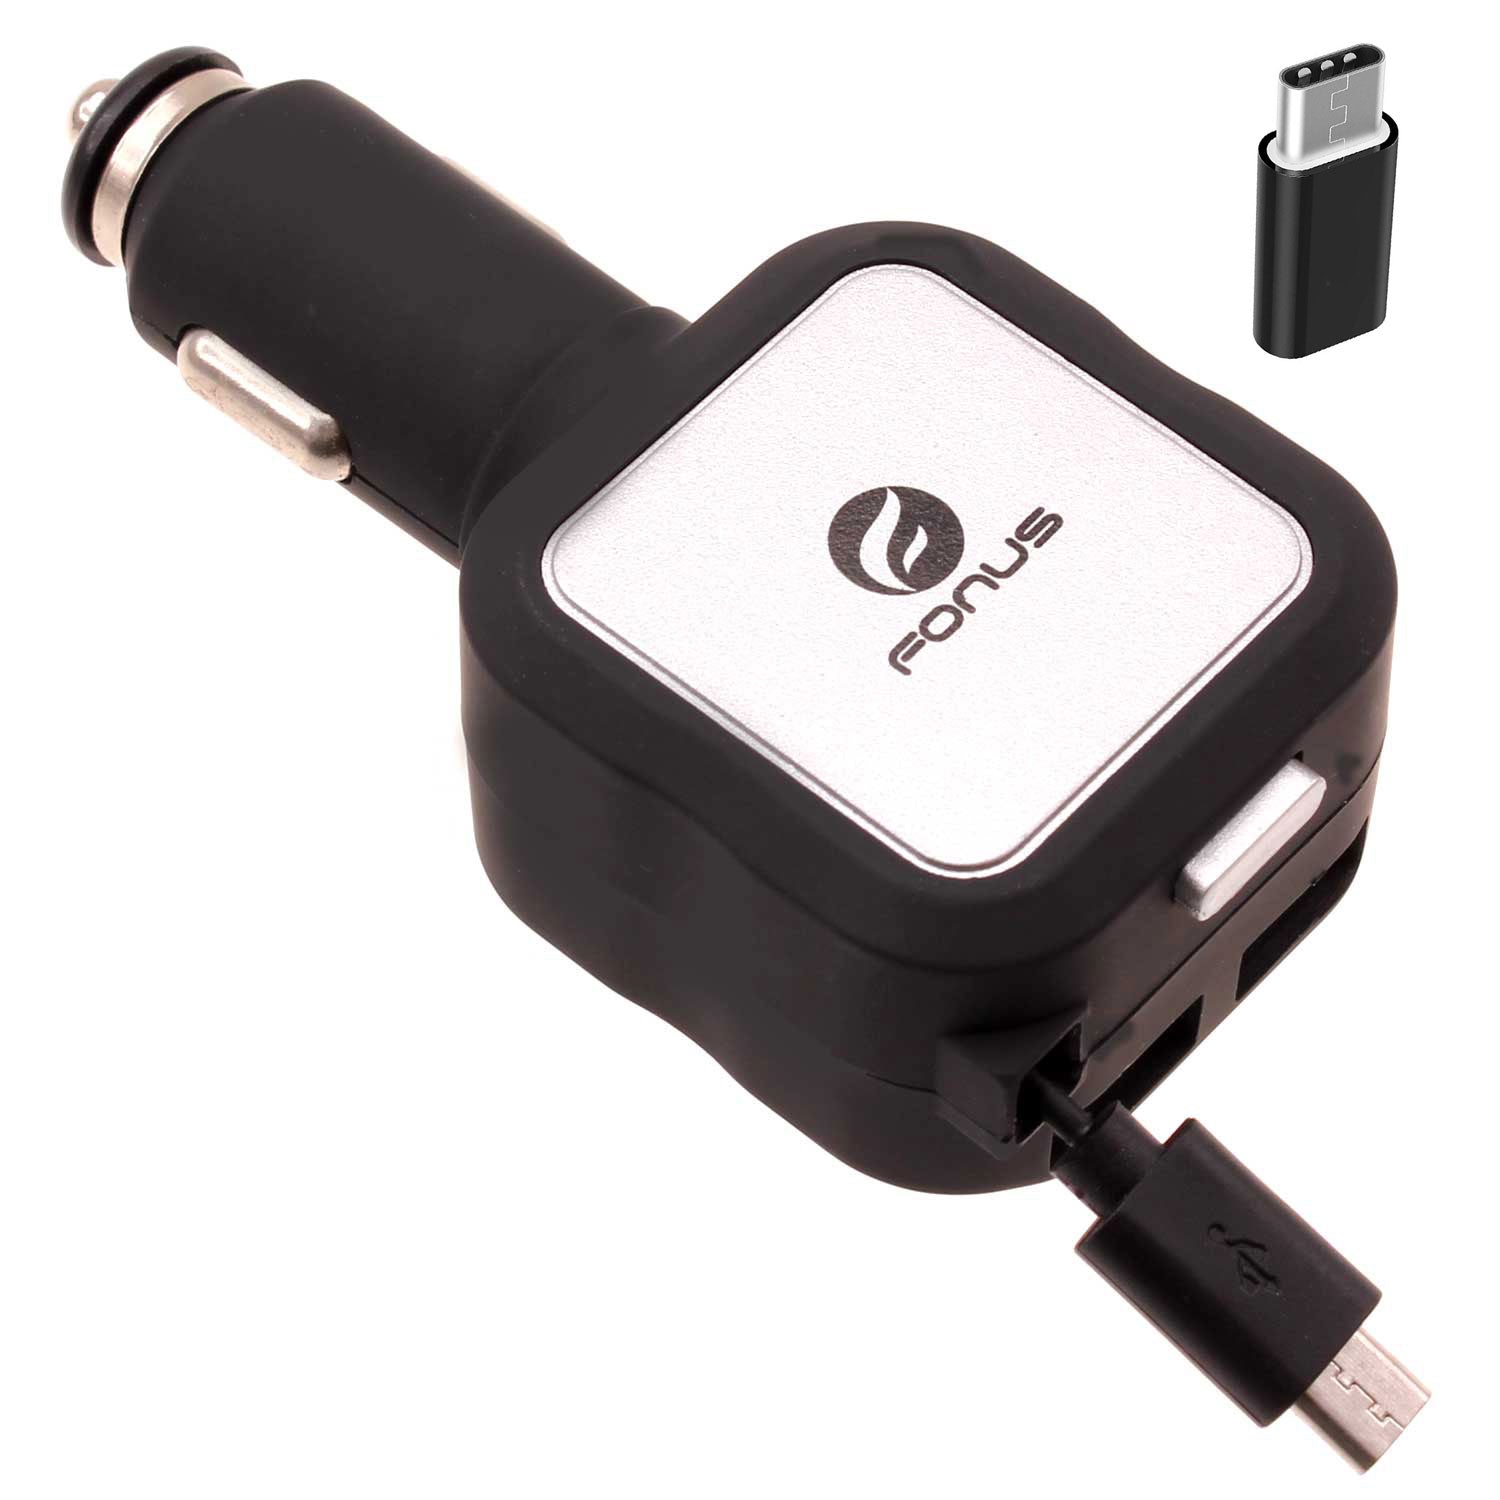  Retractable Car Charger   4.8Amp   2-Port USB  USB-C Adapter   DC Socket   Power Adapter  - ONG50 2016-1